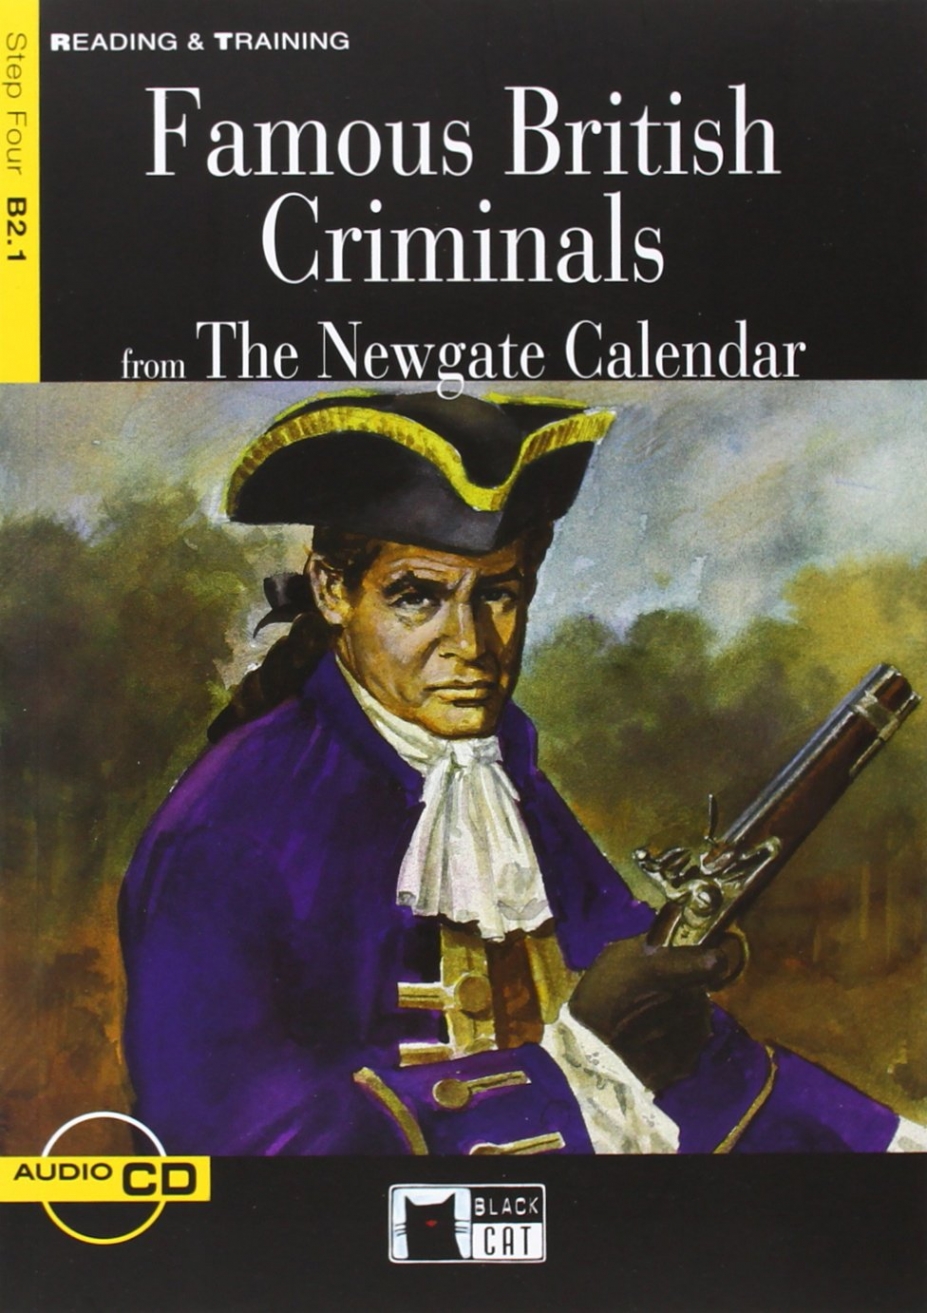 adapted Famous British Criminals from The Newgate Calendar 